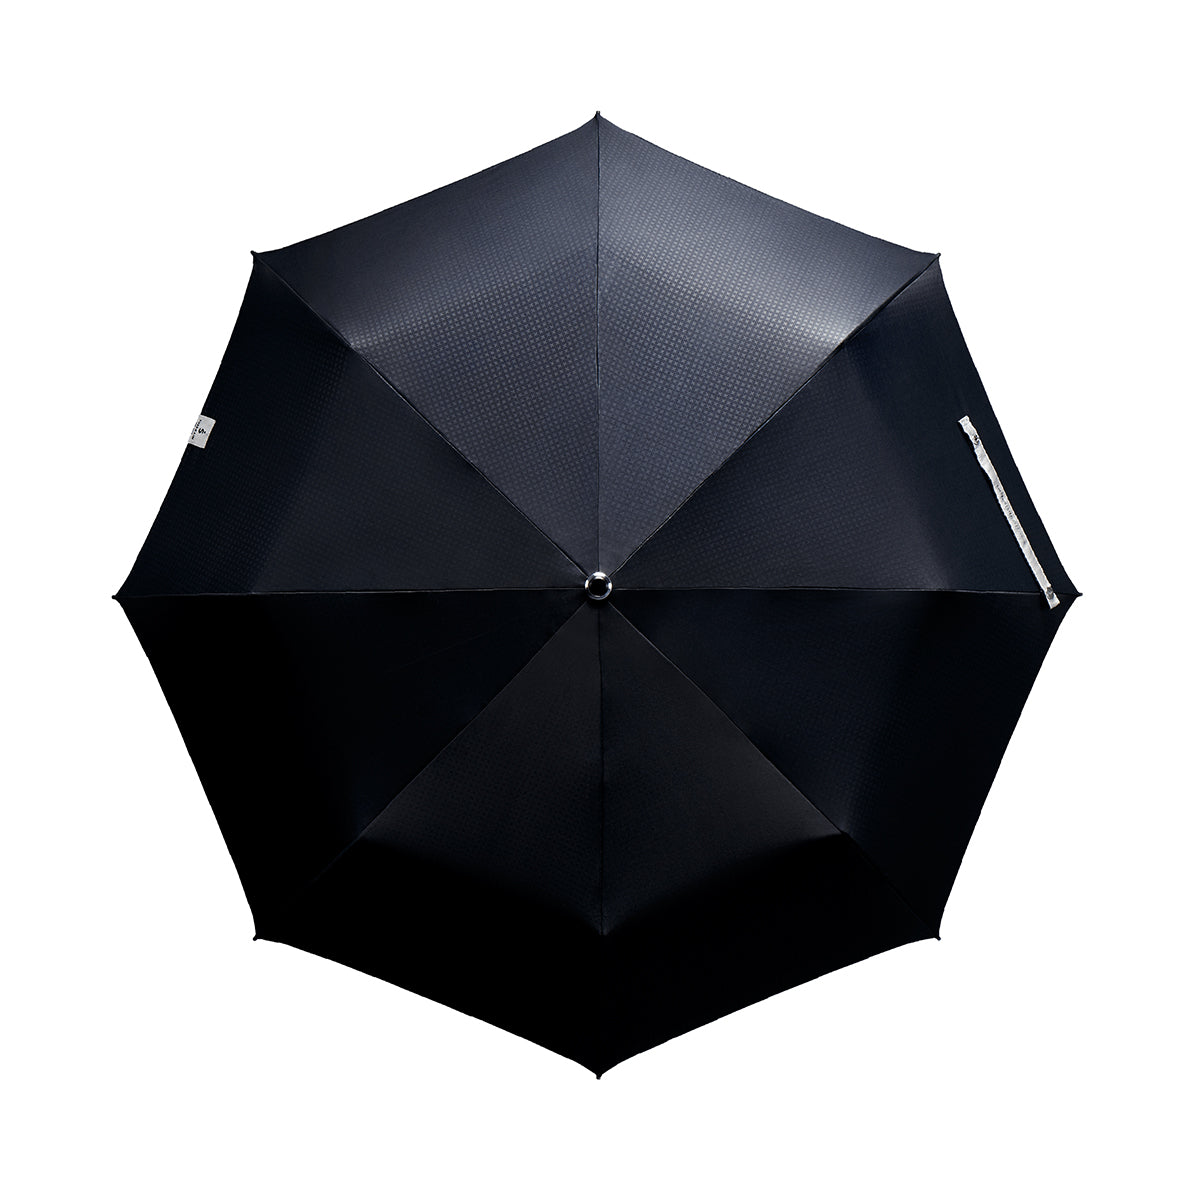 topical view of a handmade manual open compact luxury umbrella with a matte black TPR grip handle, detachable waxed cotton wrist strap, Teflon-coated fine denier woven black polyester twill canopy, chrome trim, Trilobe aircraft aluminum shaft, fiberglass ribs, and a reflective strap embroidered with “ShedRain Stratus.”